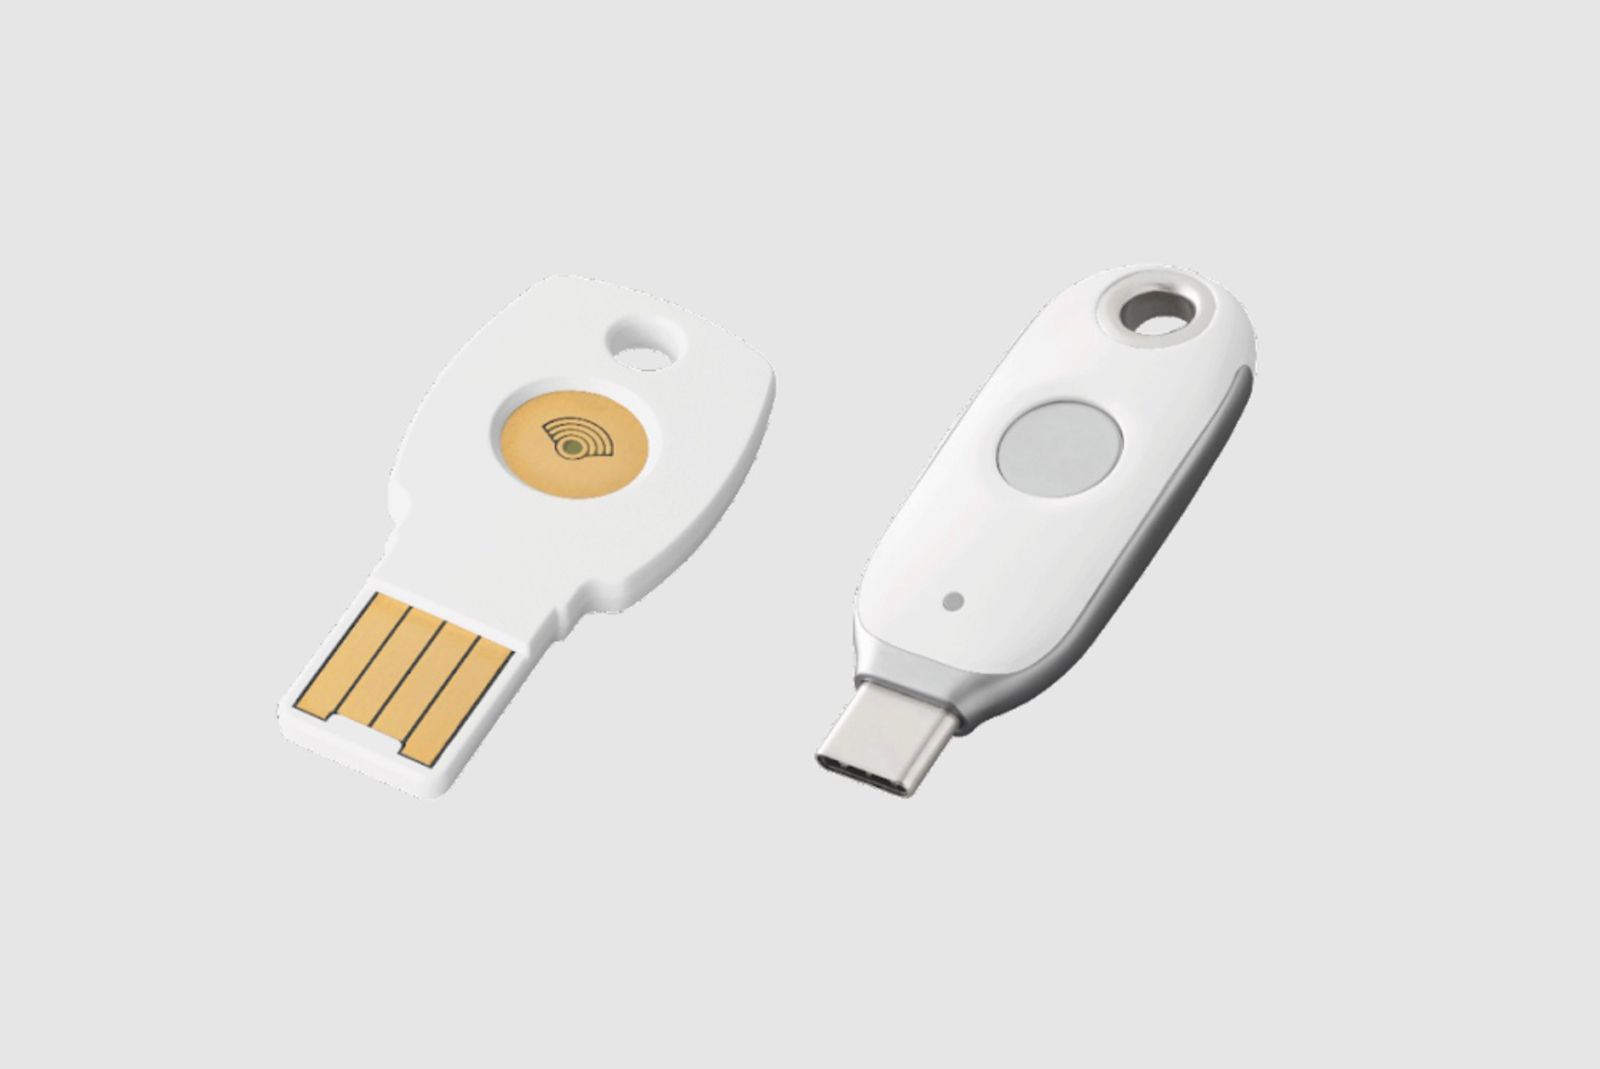 Google cleans up its Titan security key lineup and adds USB-C option with NFC photo 1